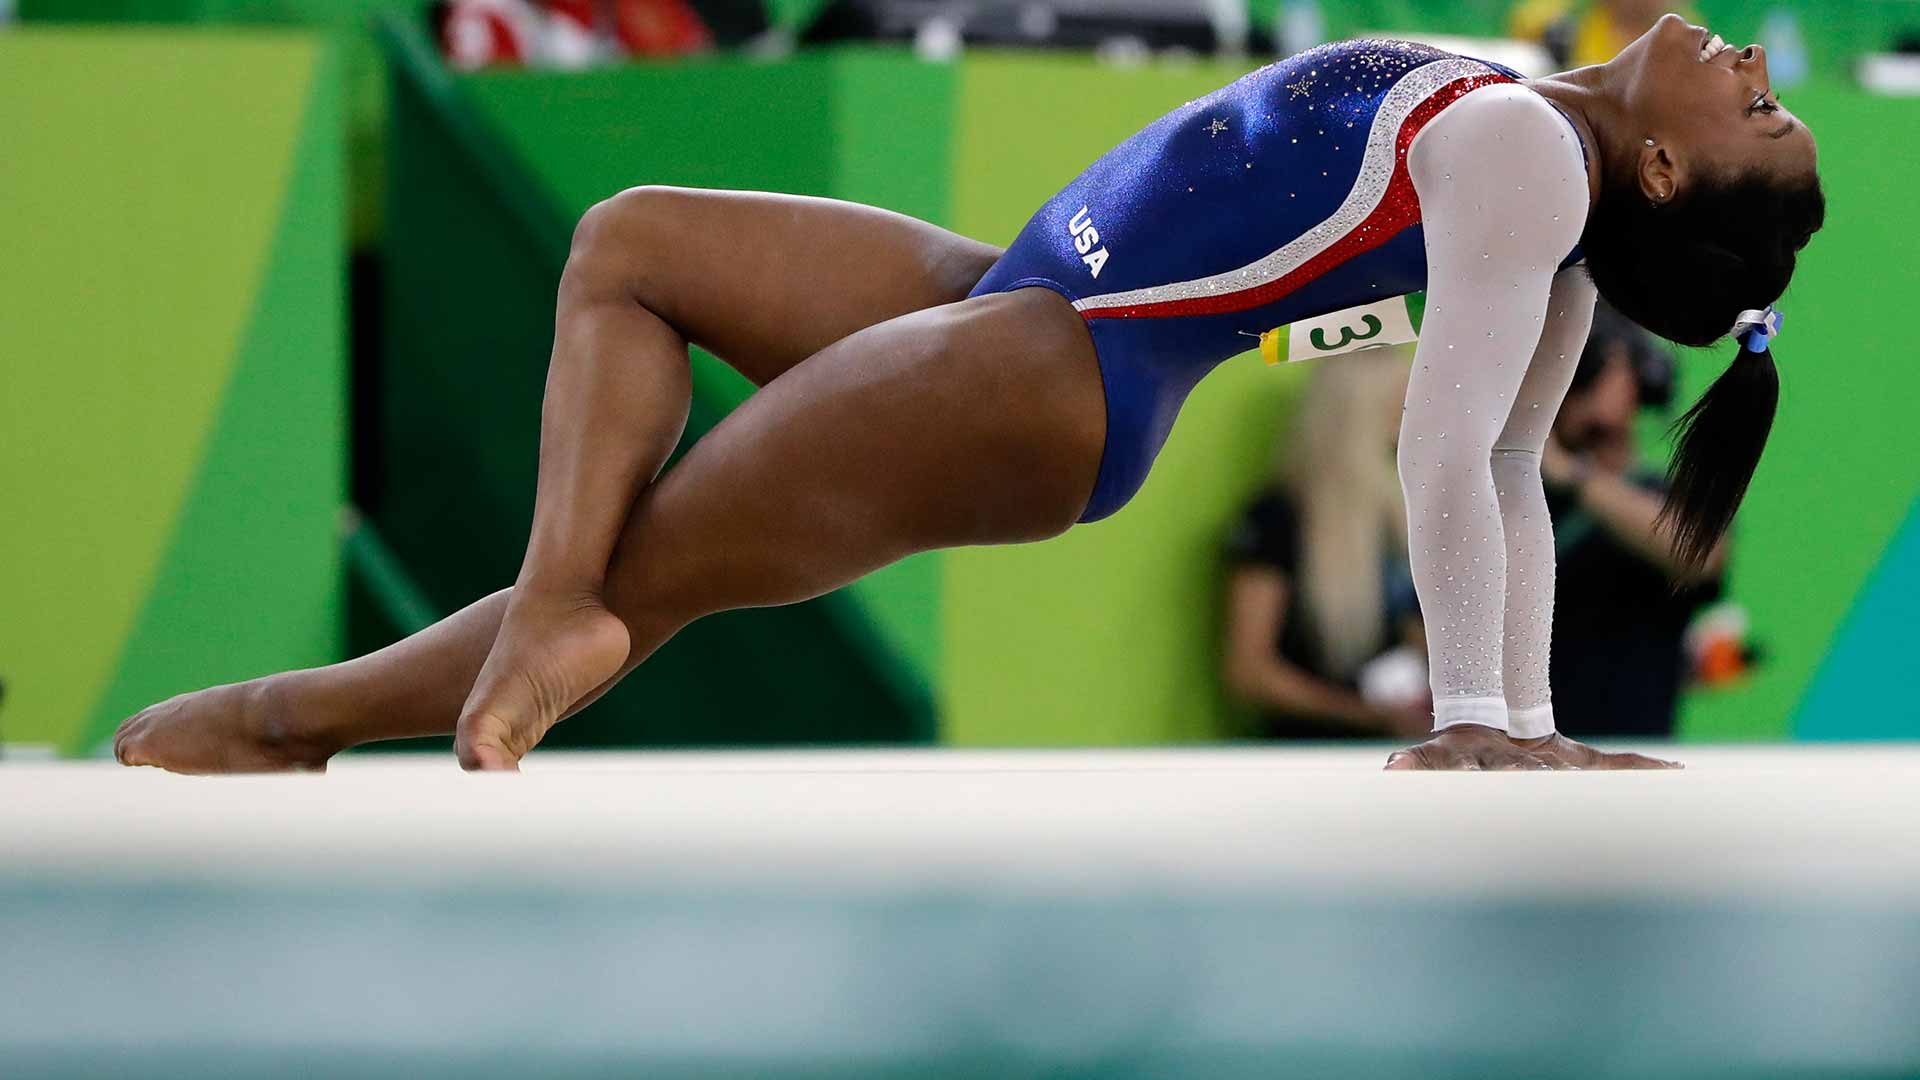 Simone Biles and other Olympic gymnasts return for one last